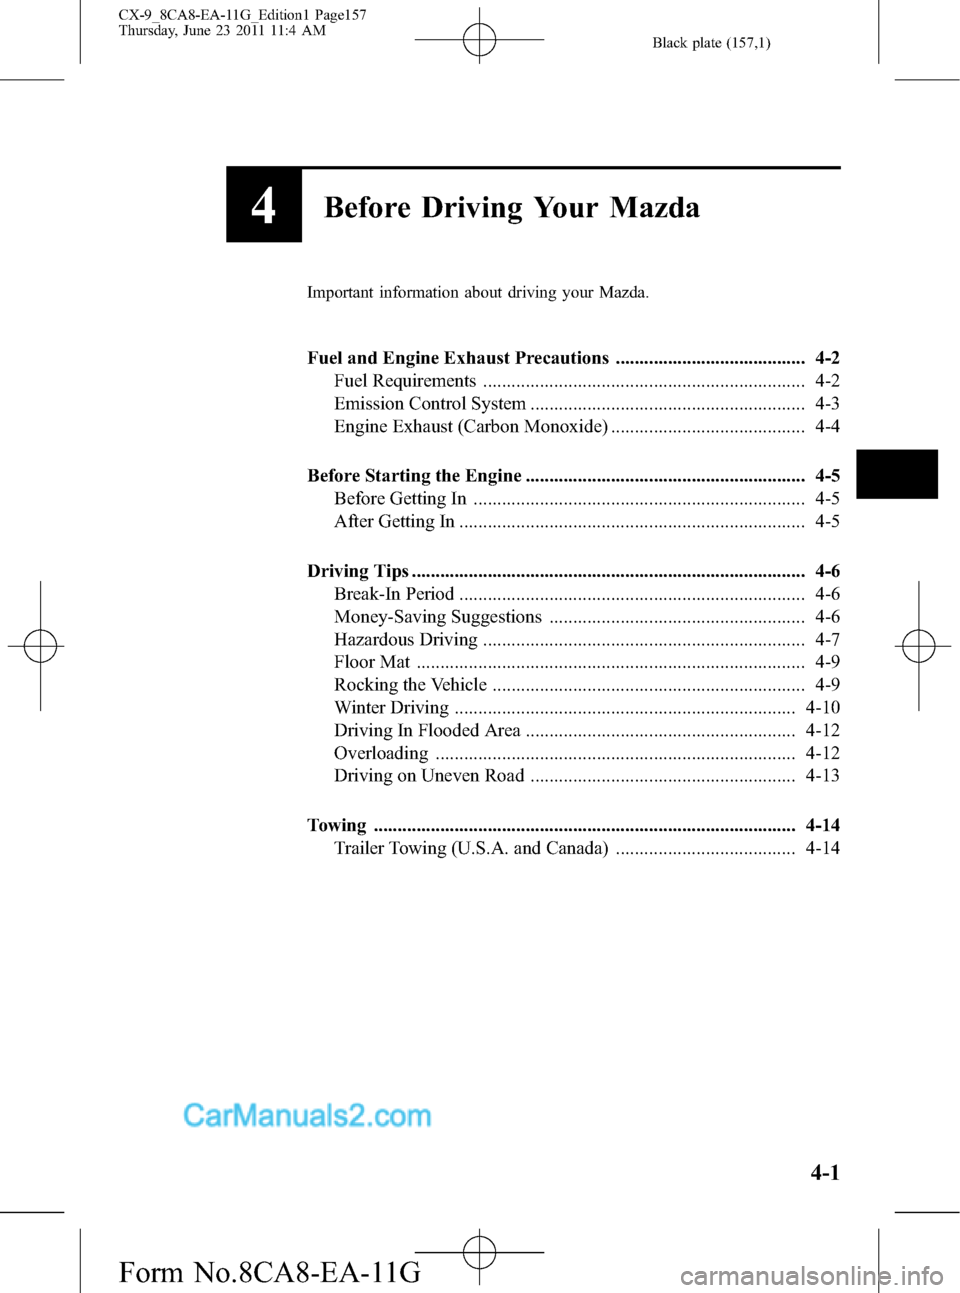 MAZDA MODEL CX-9 2012  Owners Manual (in English) Black plate (157,1)
4Before Driving Your Mazda
Important information about driving your Mazda.
Fuel and Engine Exhaust Precautions ........................................ 4-2
Fuel Requirements ......